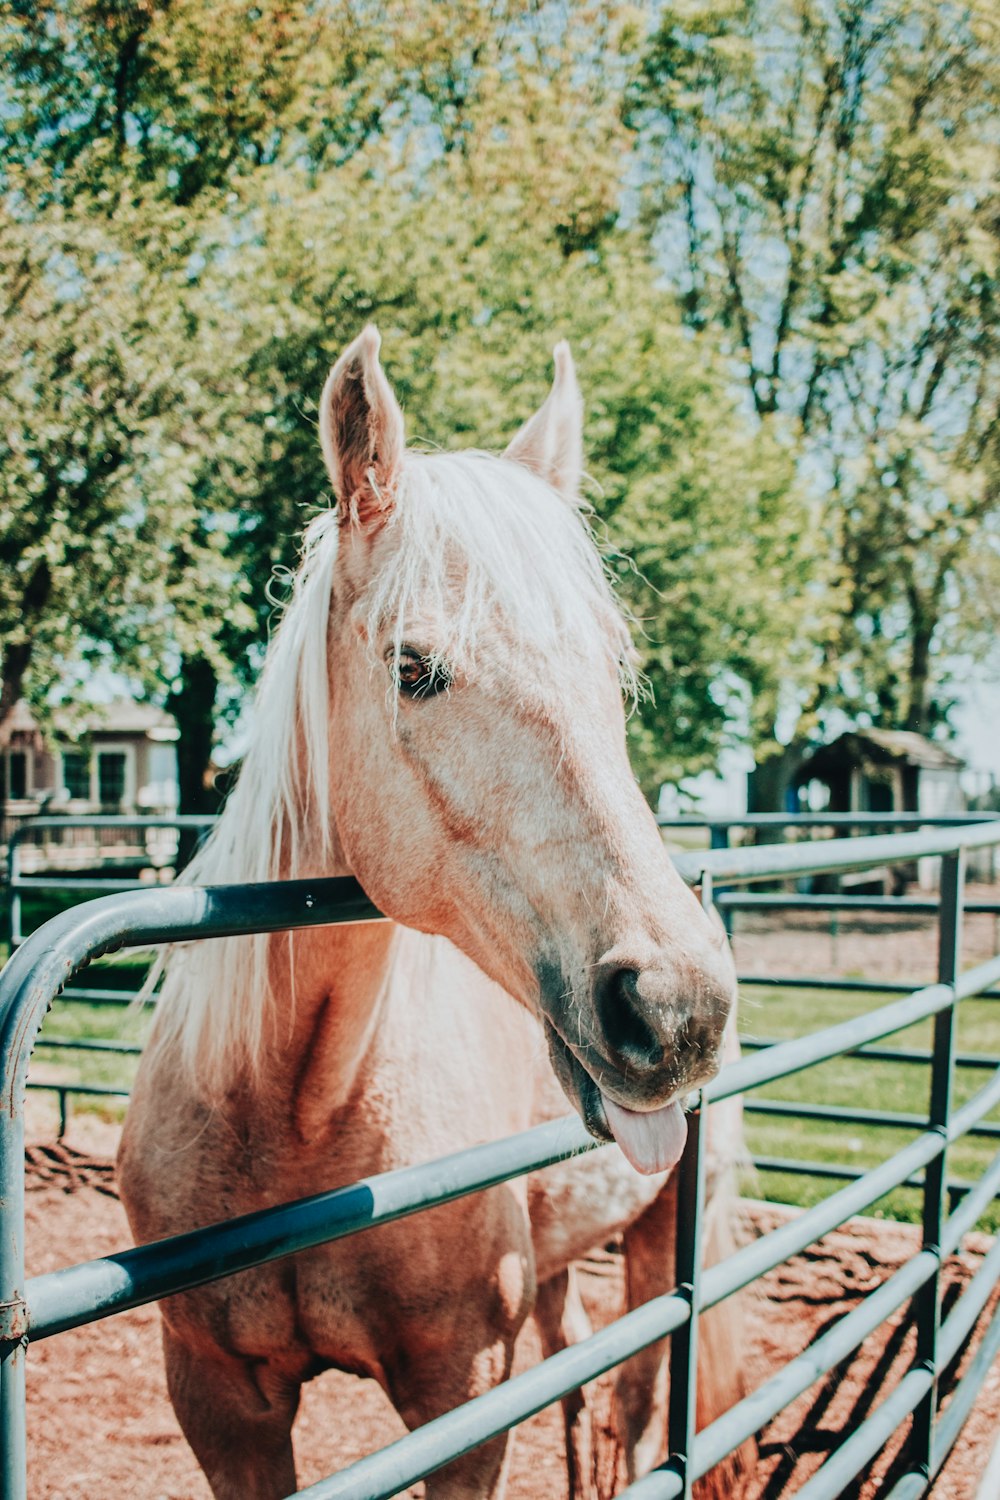 Palomino Pictures | Download Free Images on Unsplash